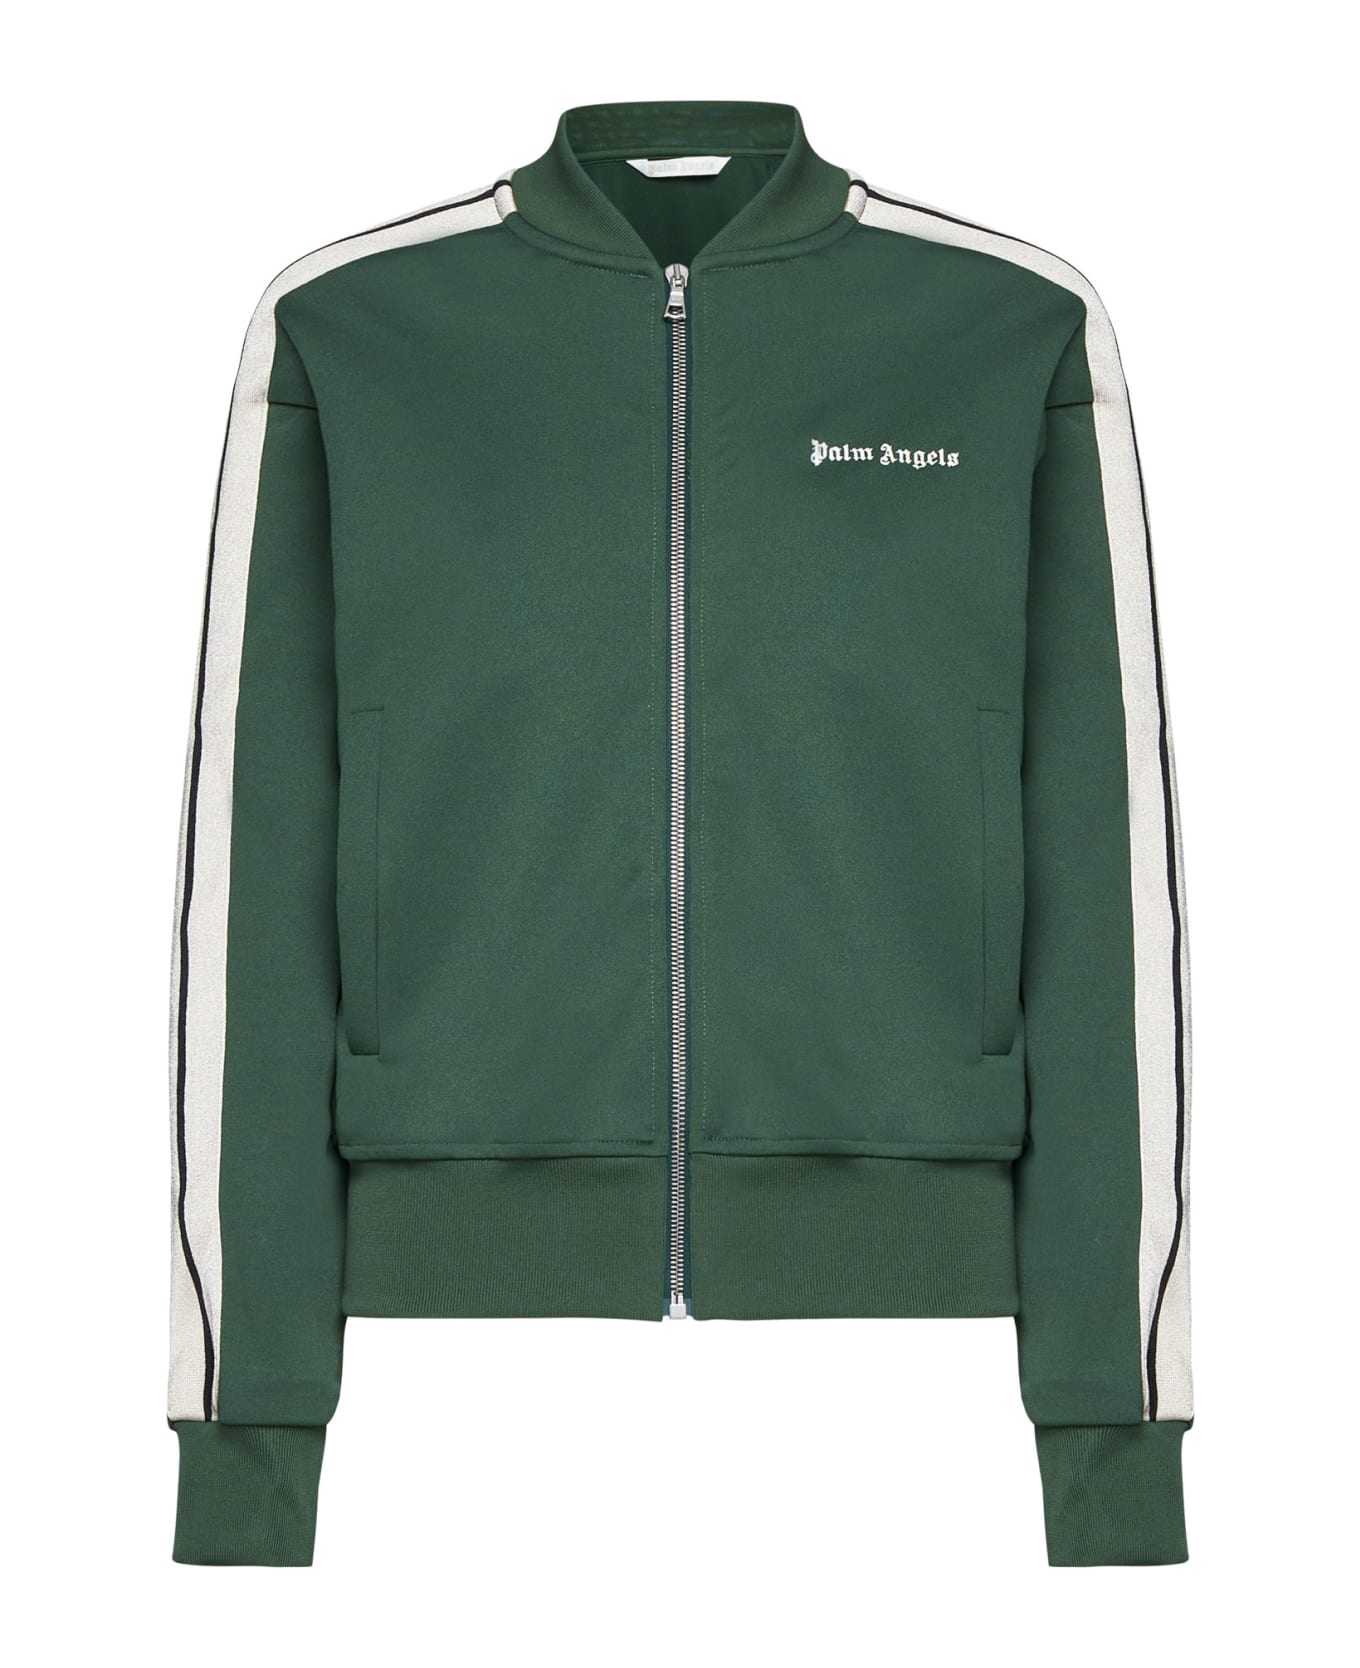 Palm Angels Fleece - Forest green off white